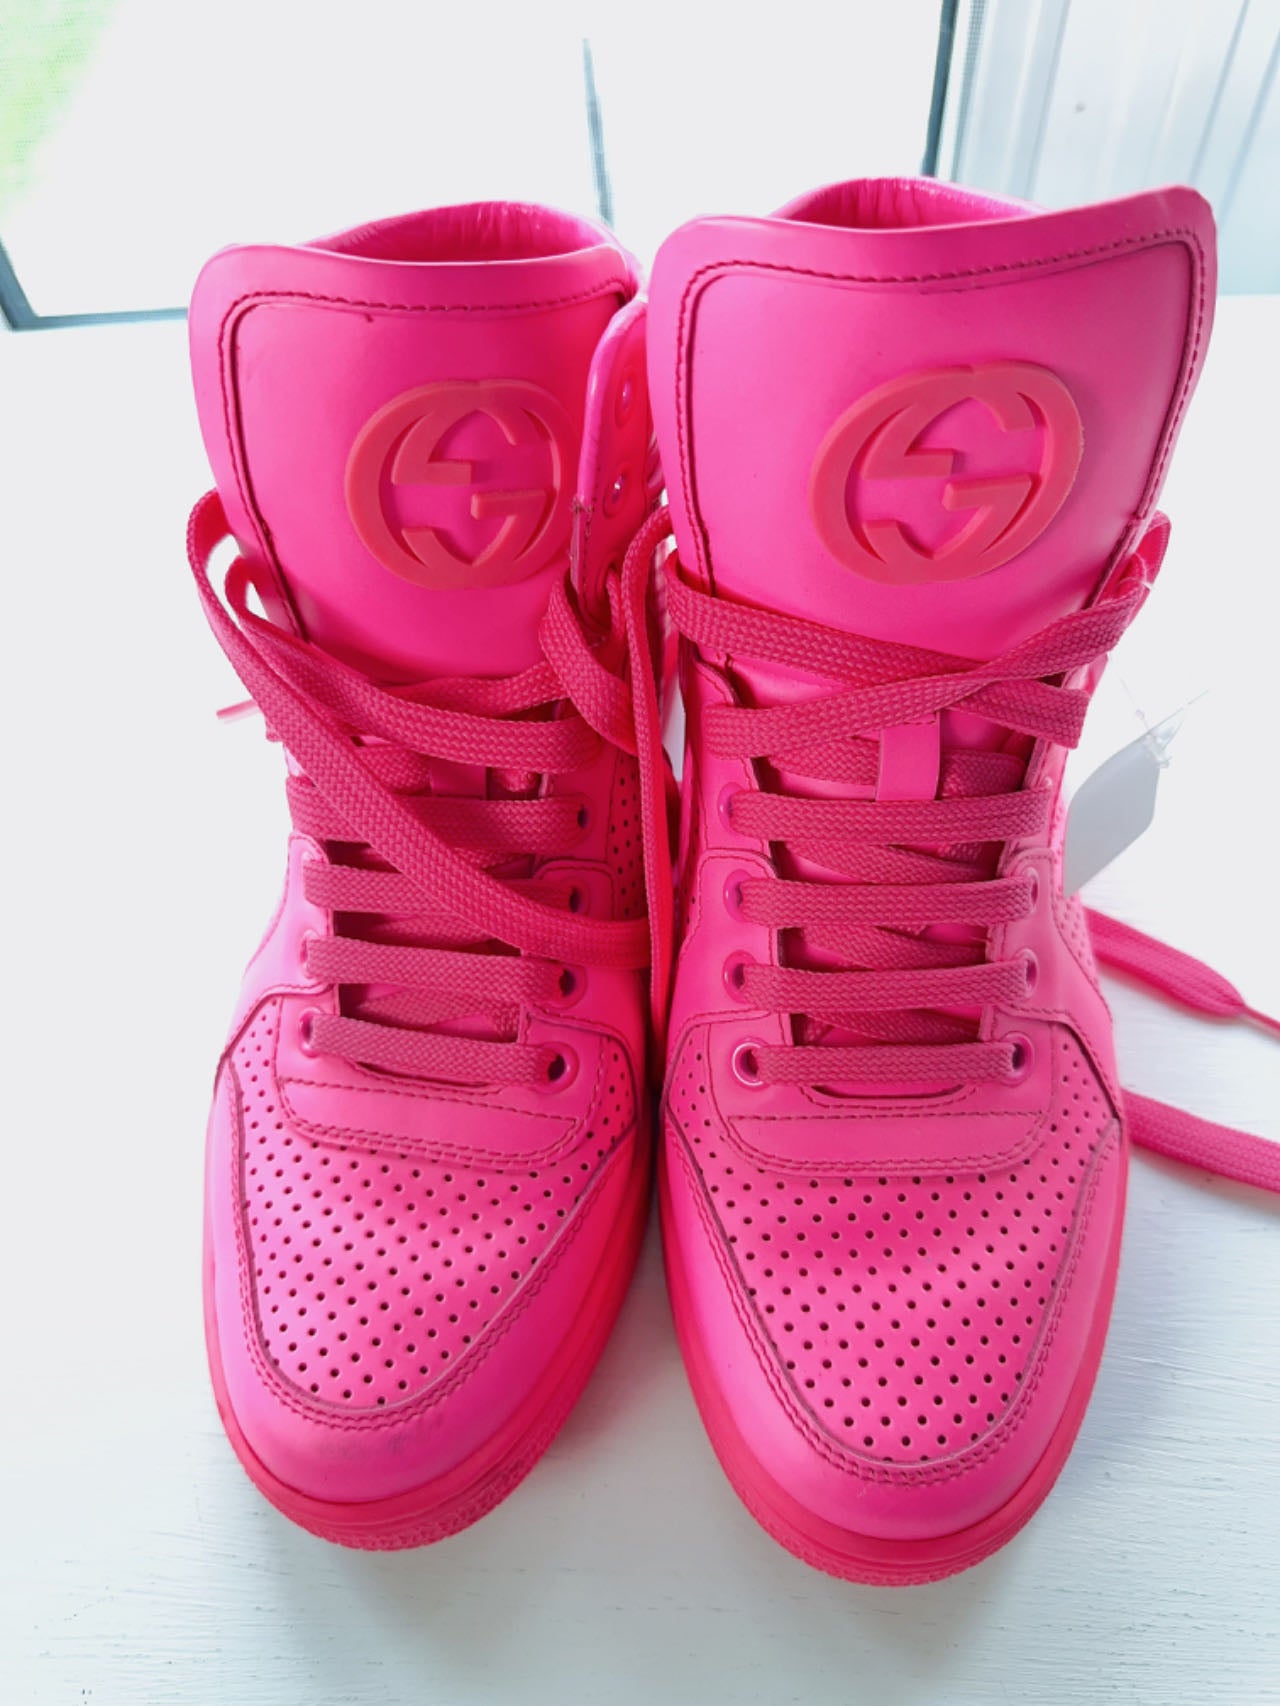 Gucci Neon Pink Leather Interlocking G High Top Sneakers Size 35.5